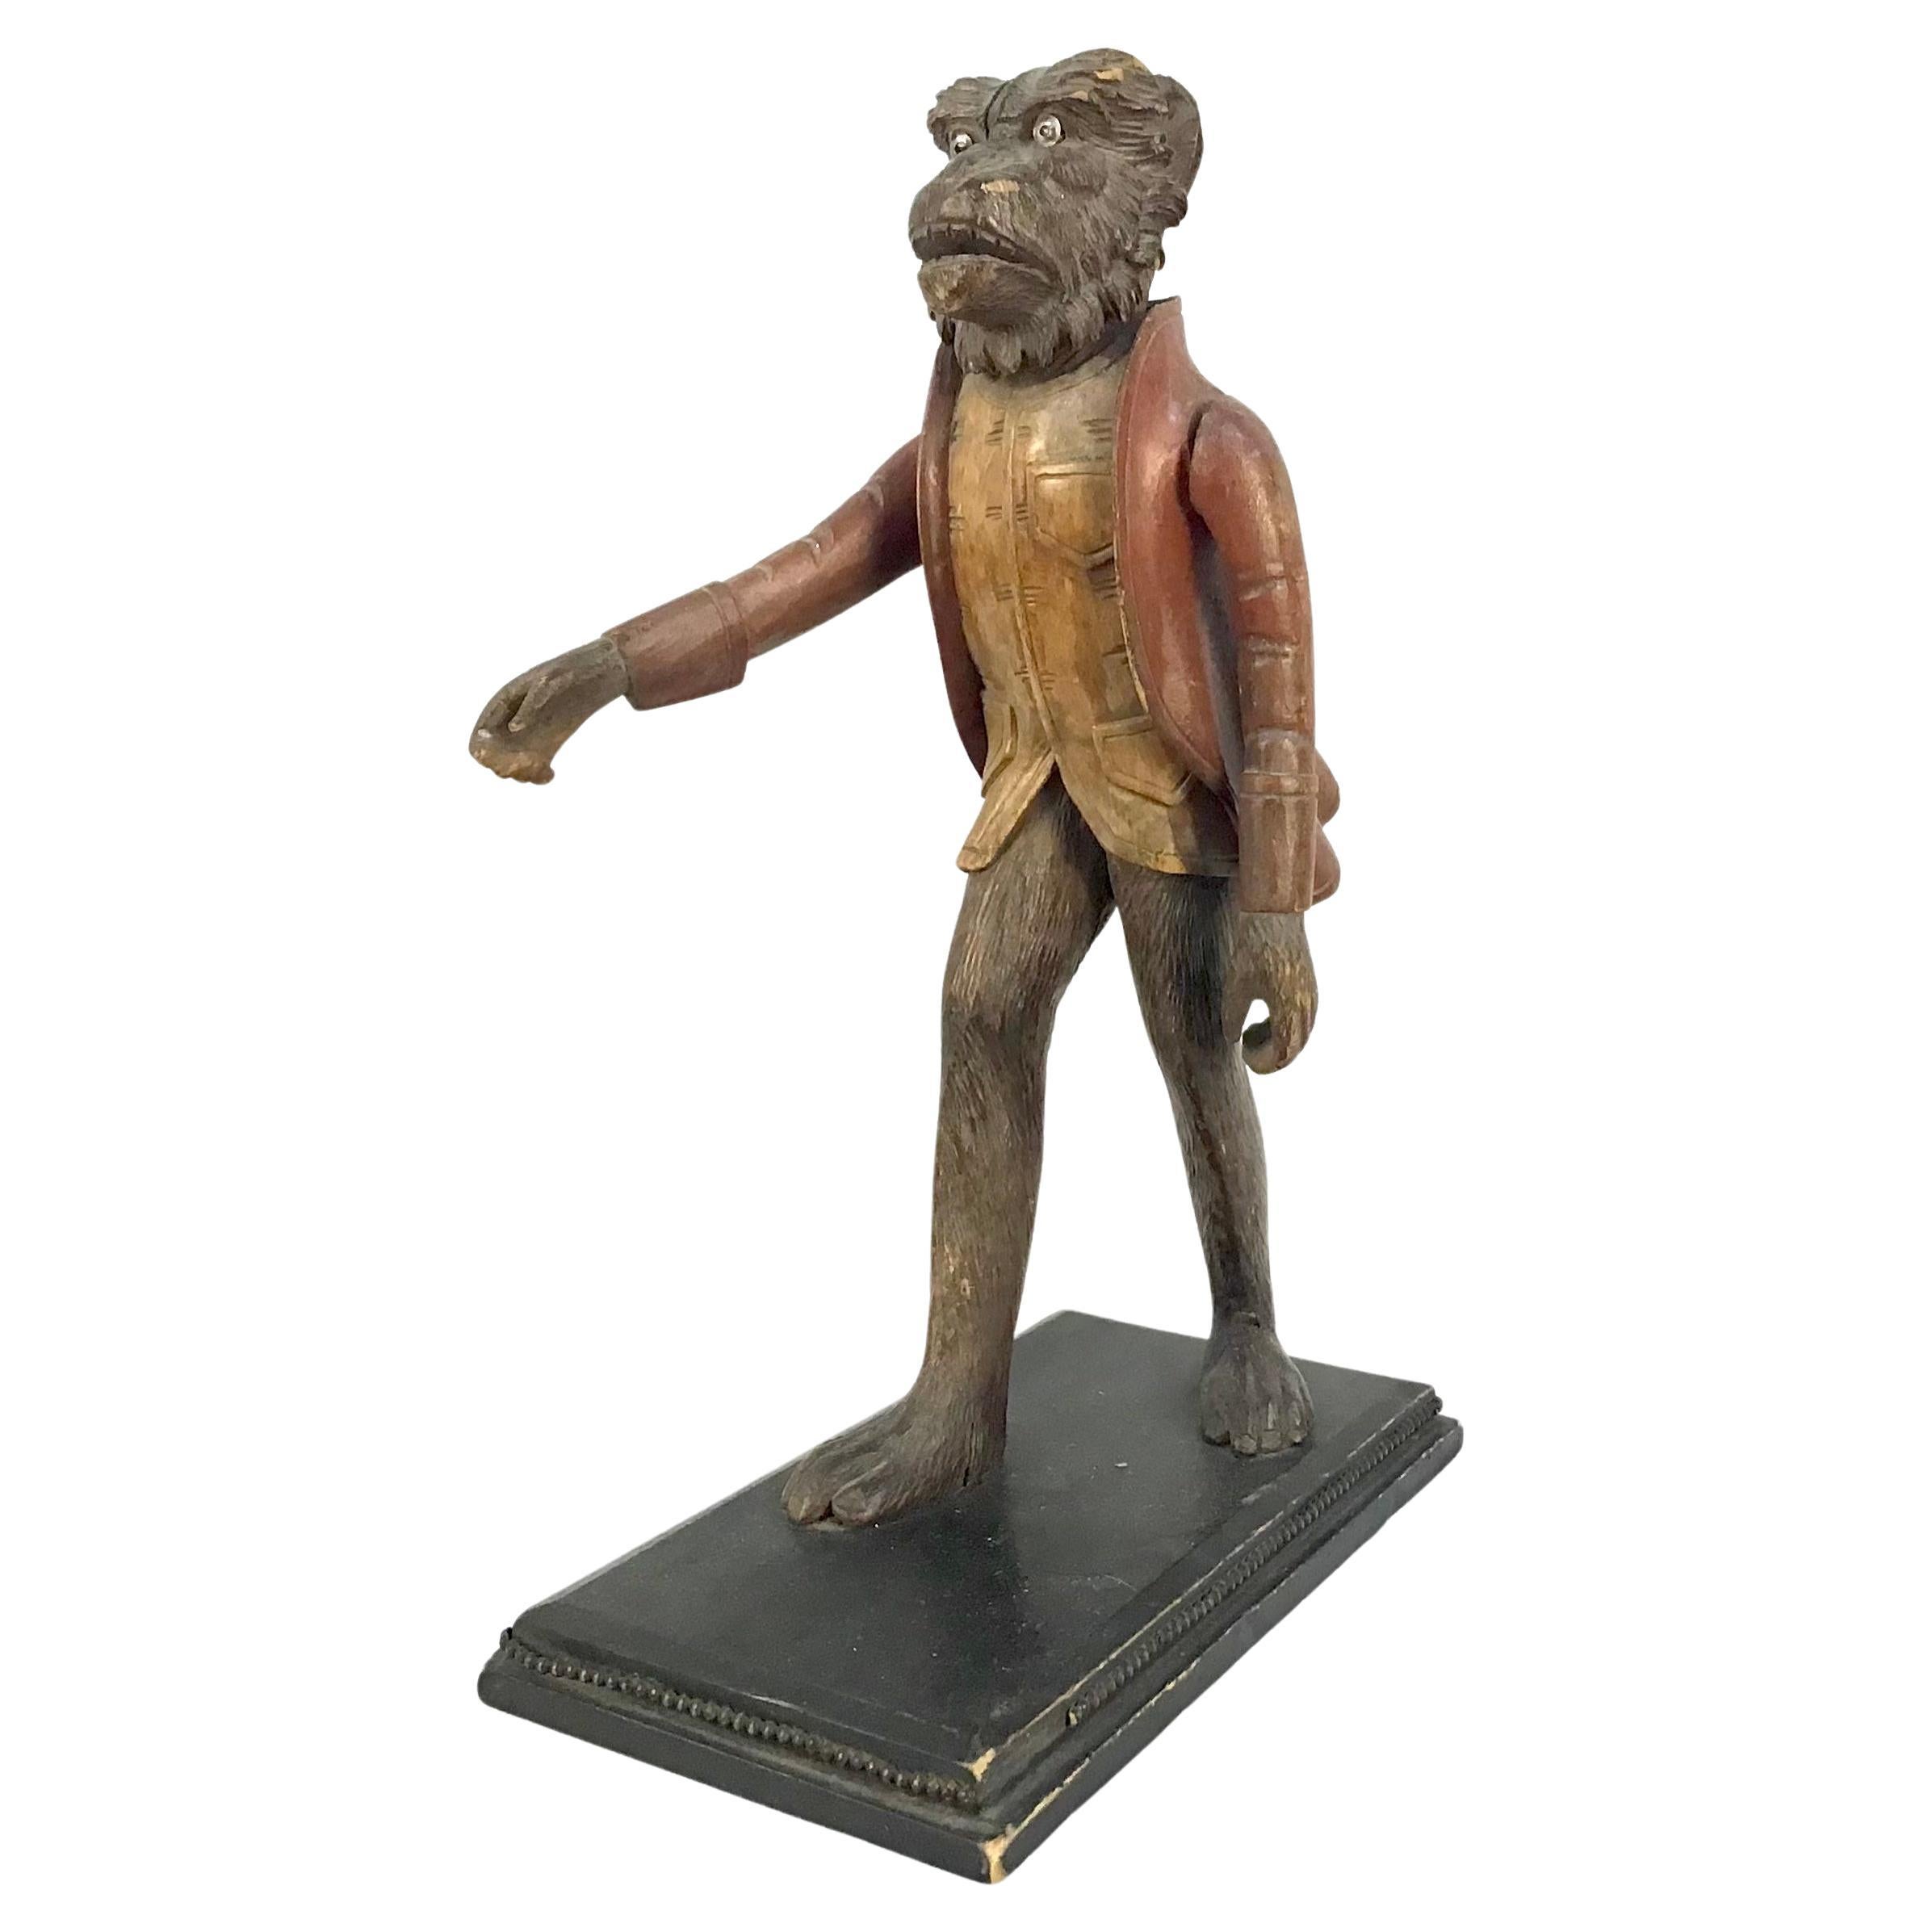 A finely carved wooden monkey butler figure on stand, glass eyes, open mouth with teeth, made to hold a tray in its outstretched arms / hands, Italian early 19th century. A rare find.